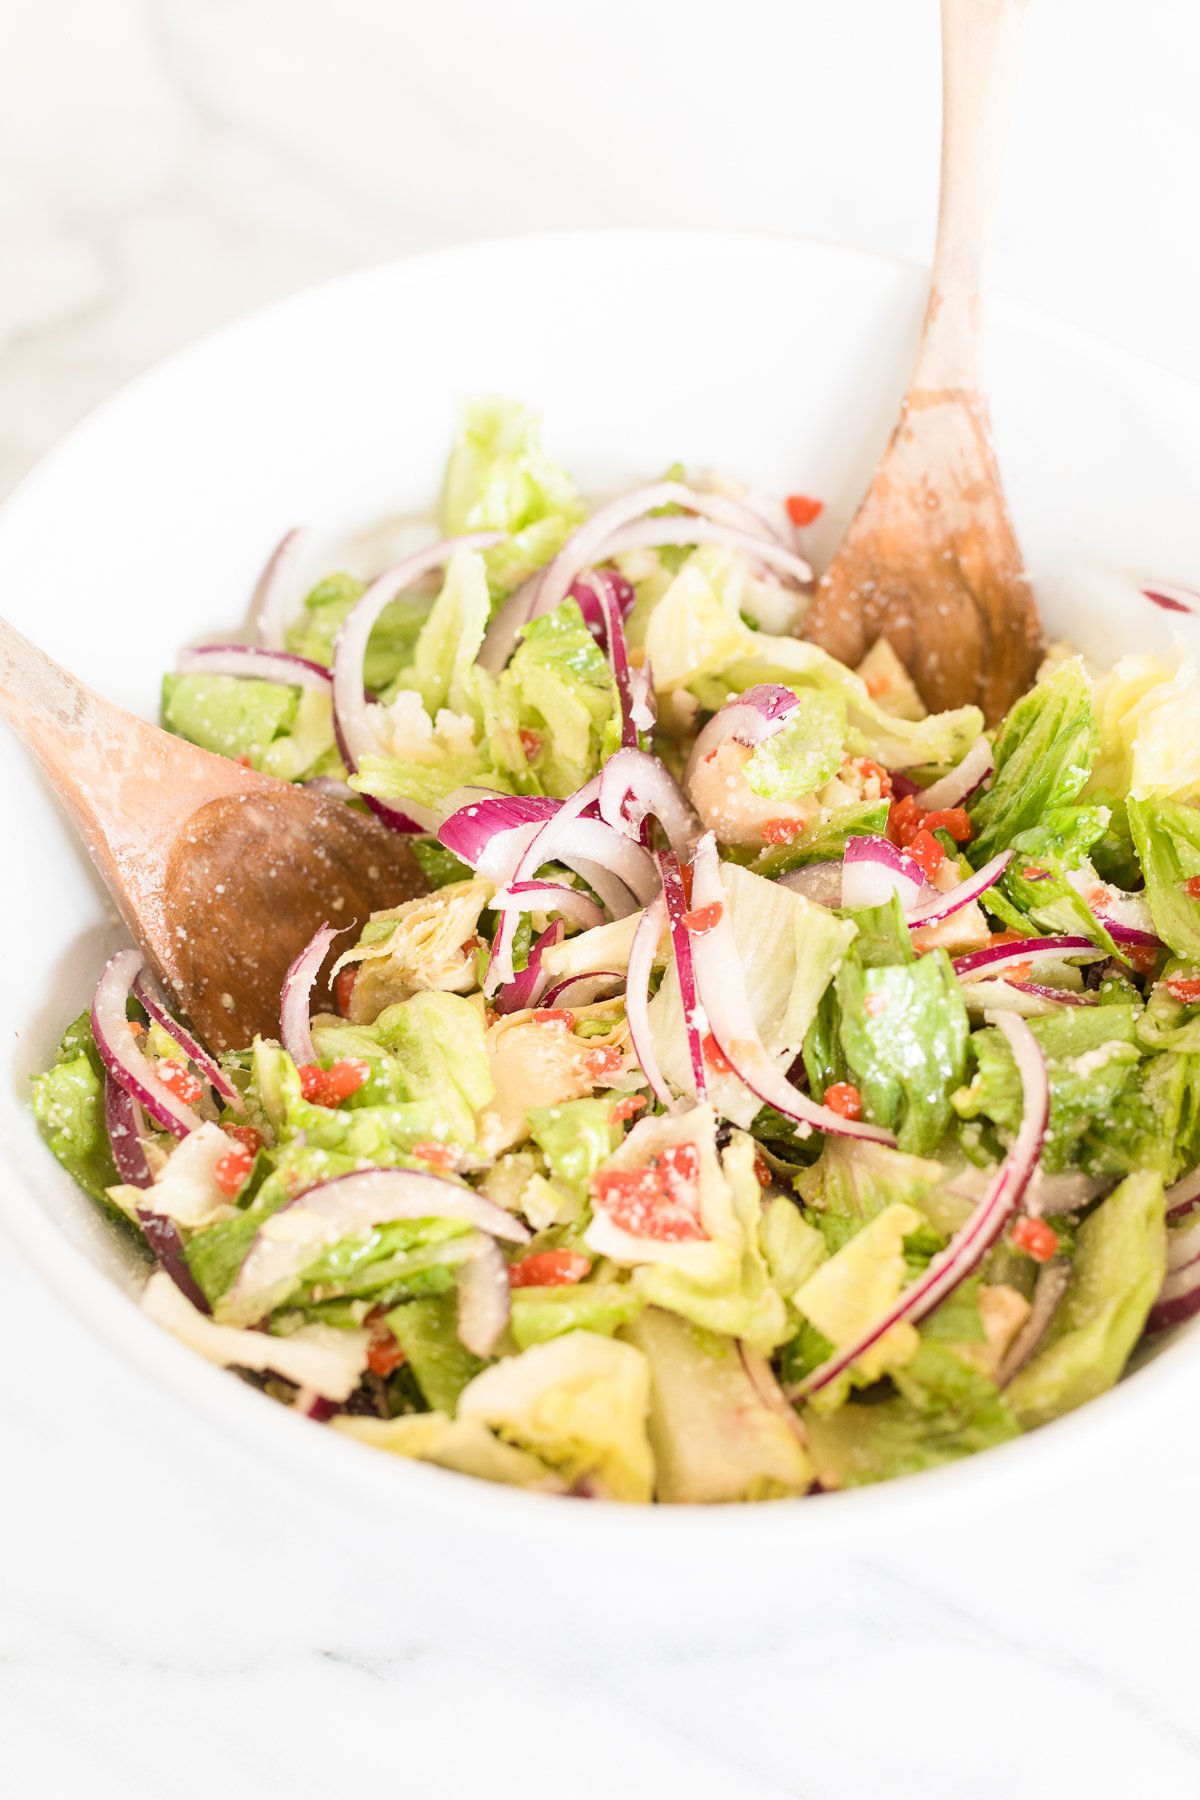 Fresh Italian vegetable salad with sliced red onions and wooden serving utensils, topped with Italian salad dressing.